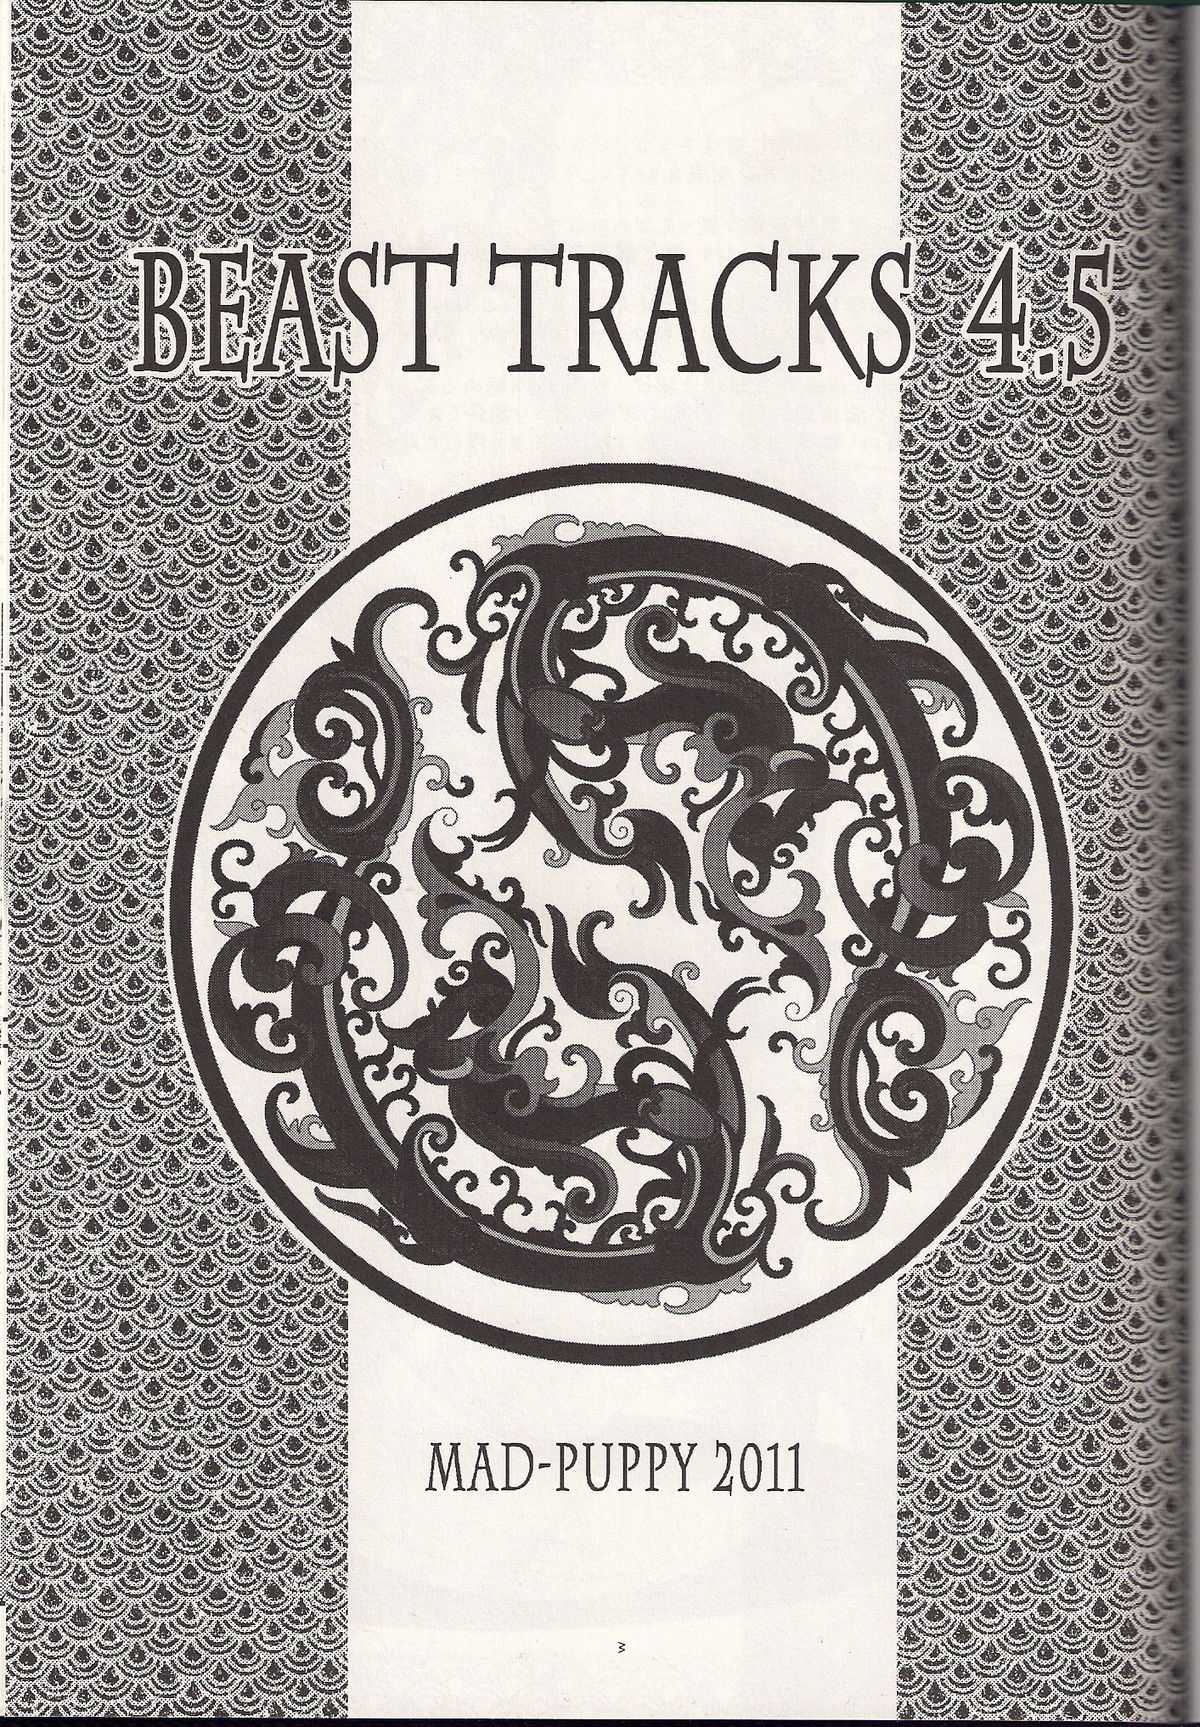 [MAD-PUPPY (Date Natsuku)] Beast Tracks 4.5 [MAD-PUPPY (伊達なつく)] BEAST TRACKS 4.5